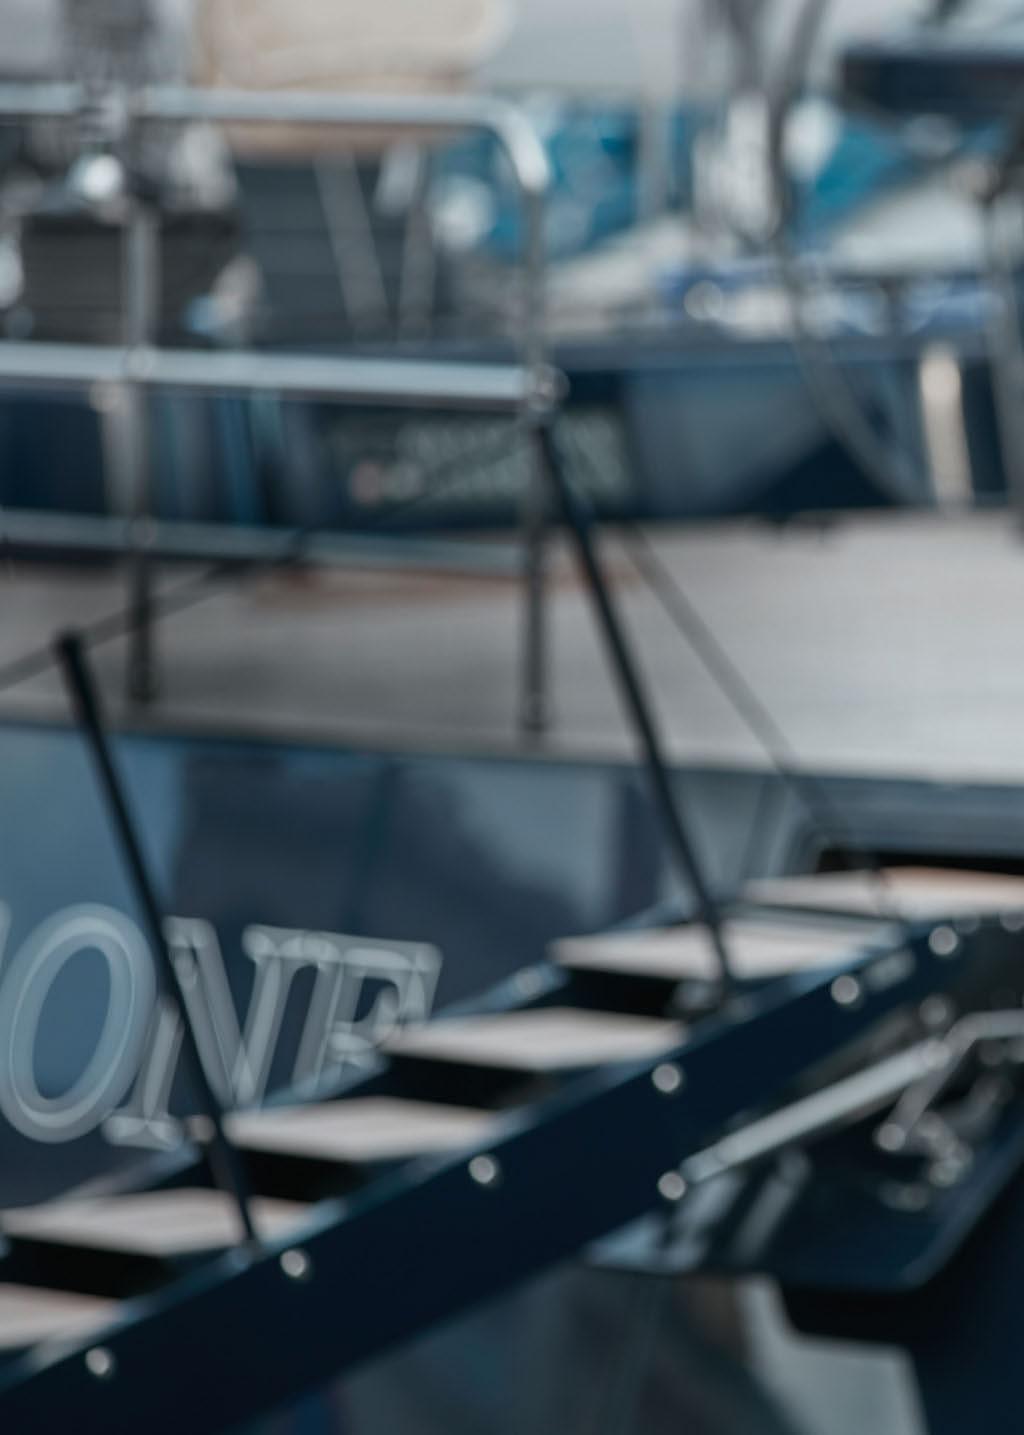 THE DRIVING FORCE: JOY. A STATEMENT FOR MARITIME SPORT.